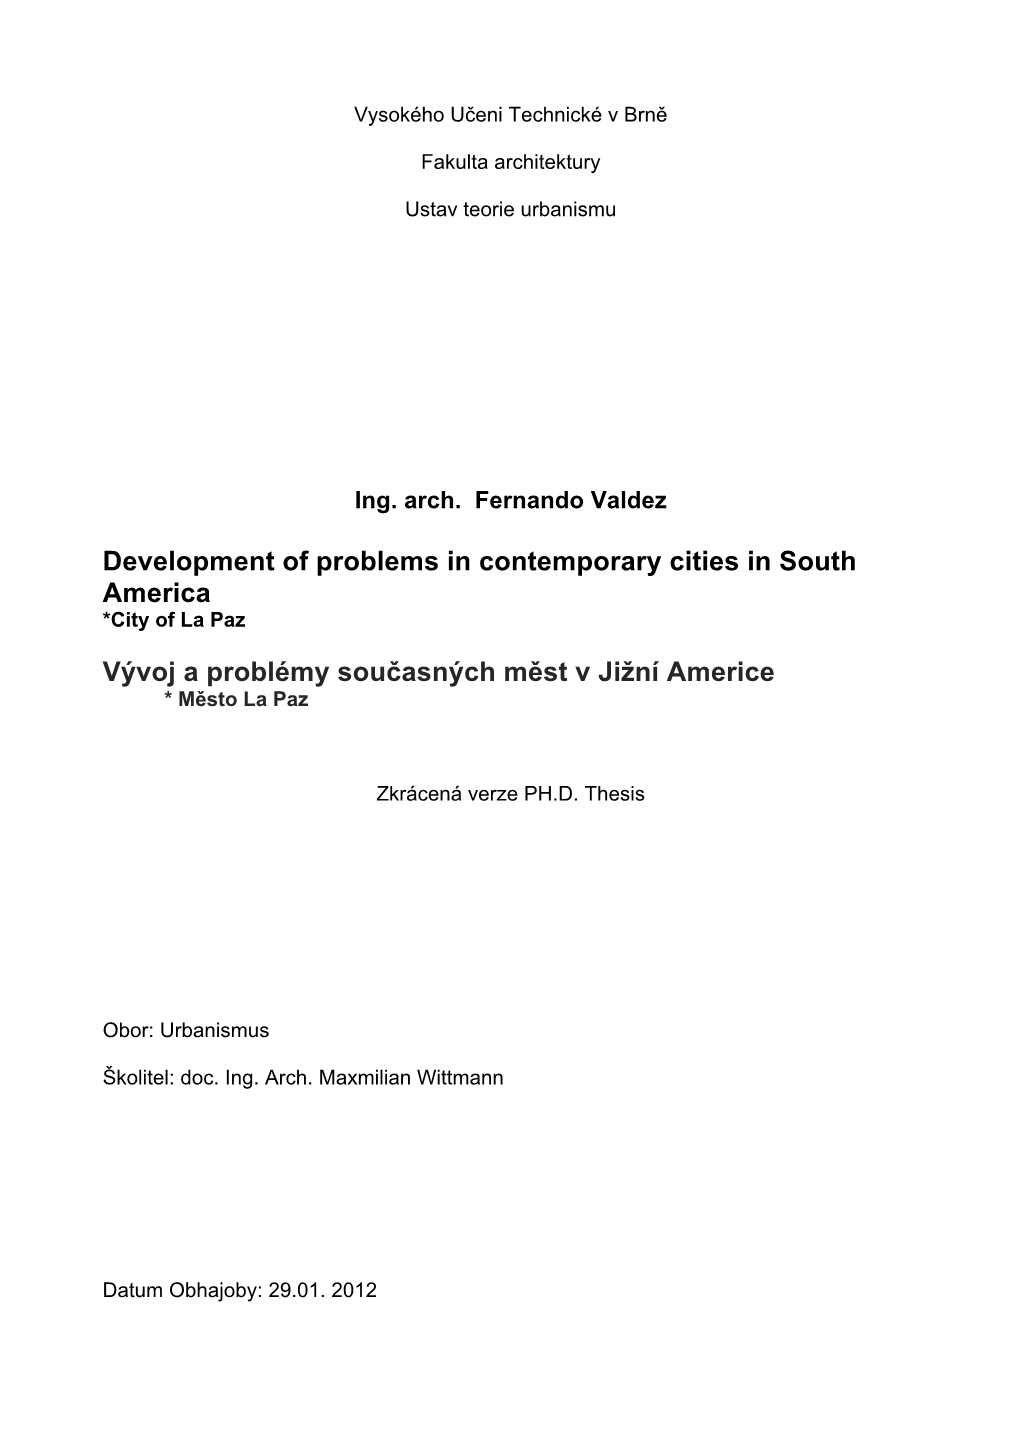 Development of Problems in Contemporary Cities in South America *City of La Paz